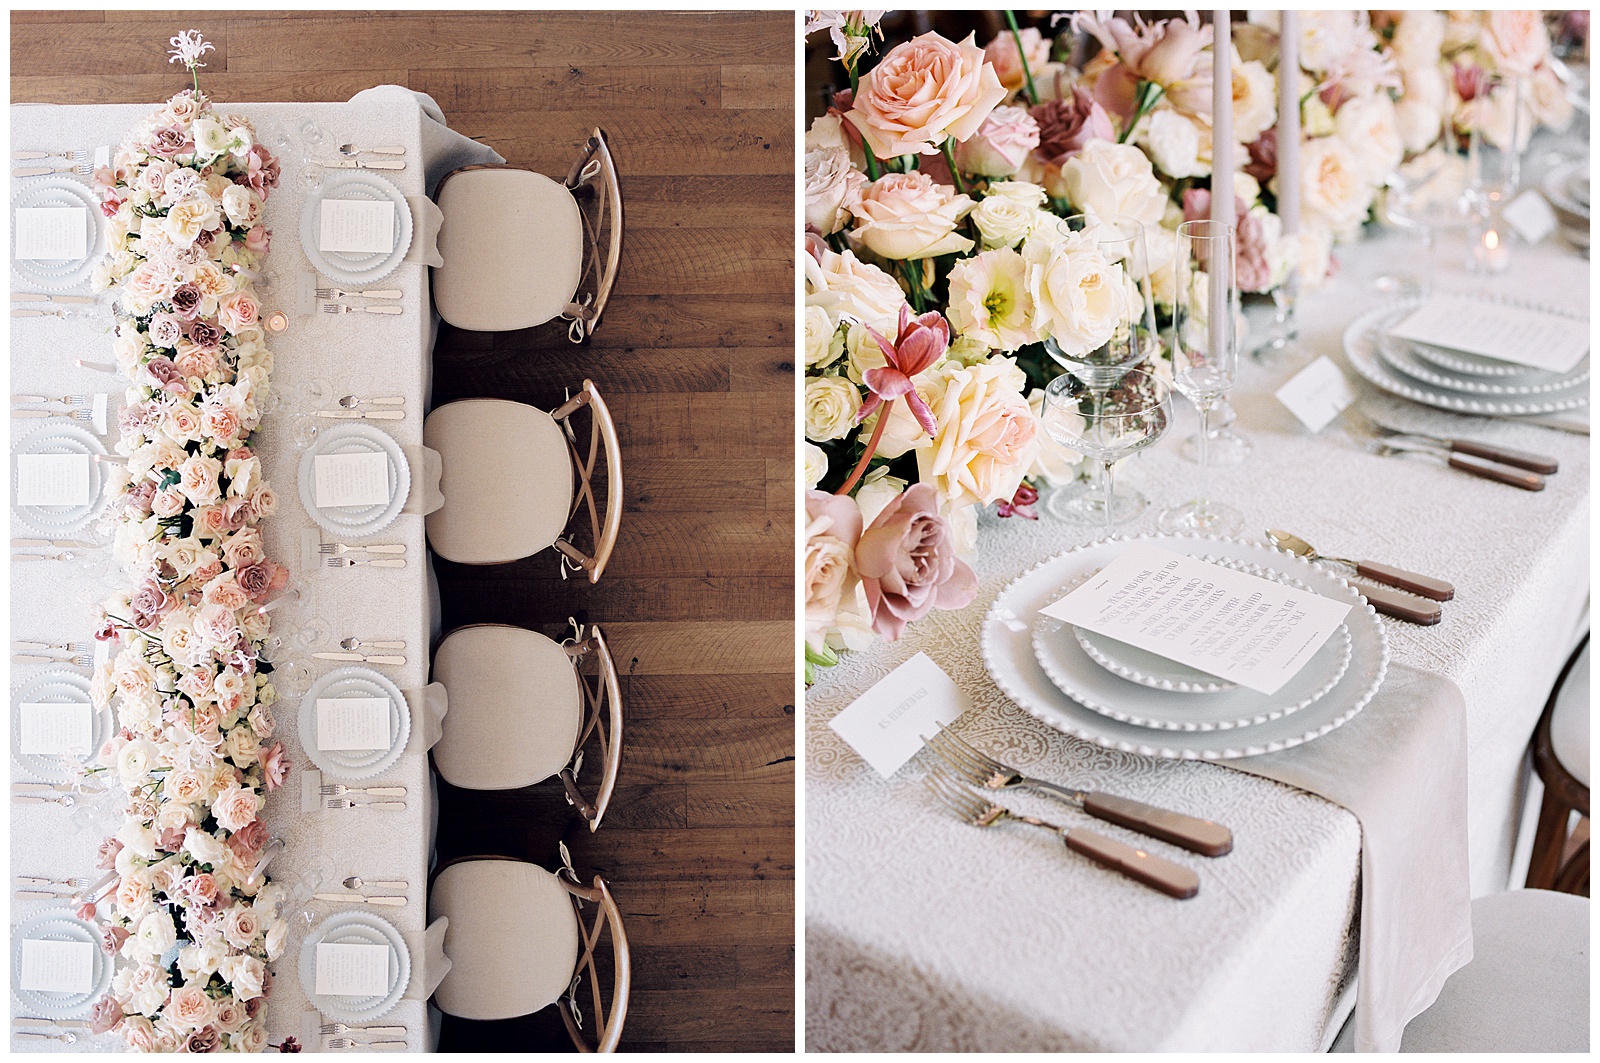 wedding reception details with pink and ivory flowers